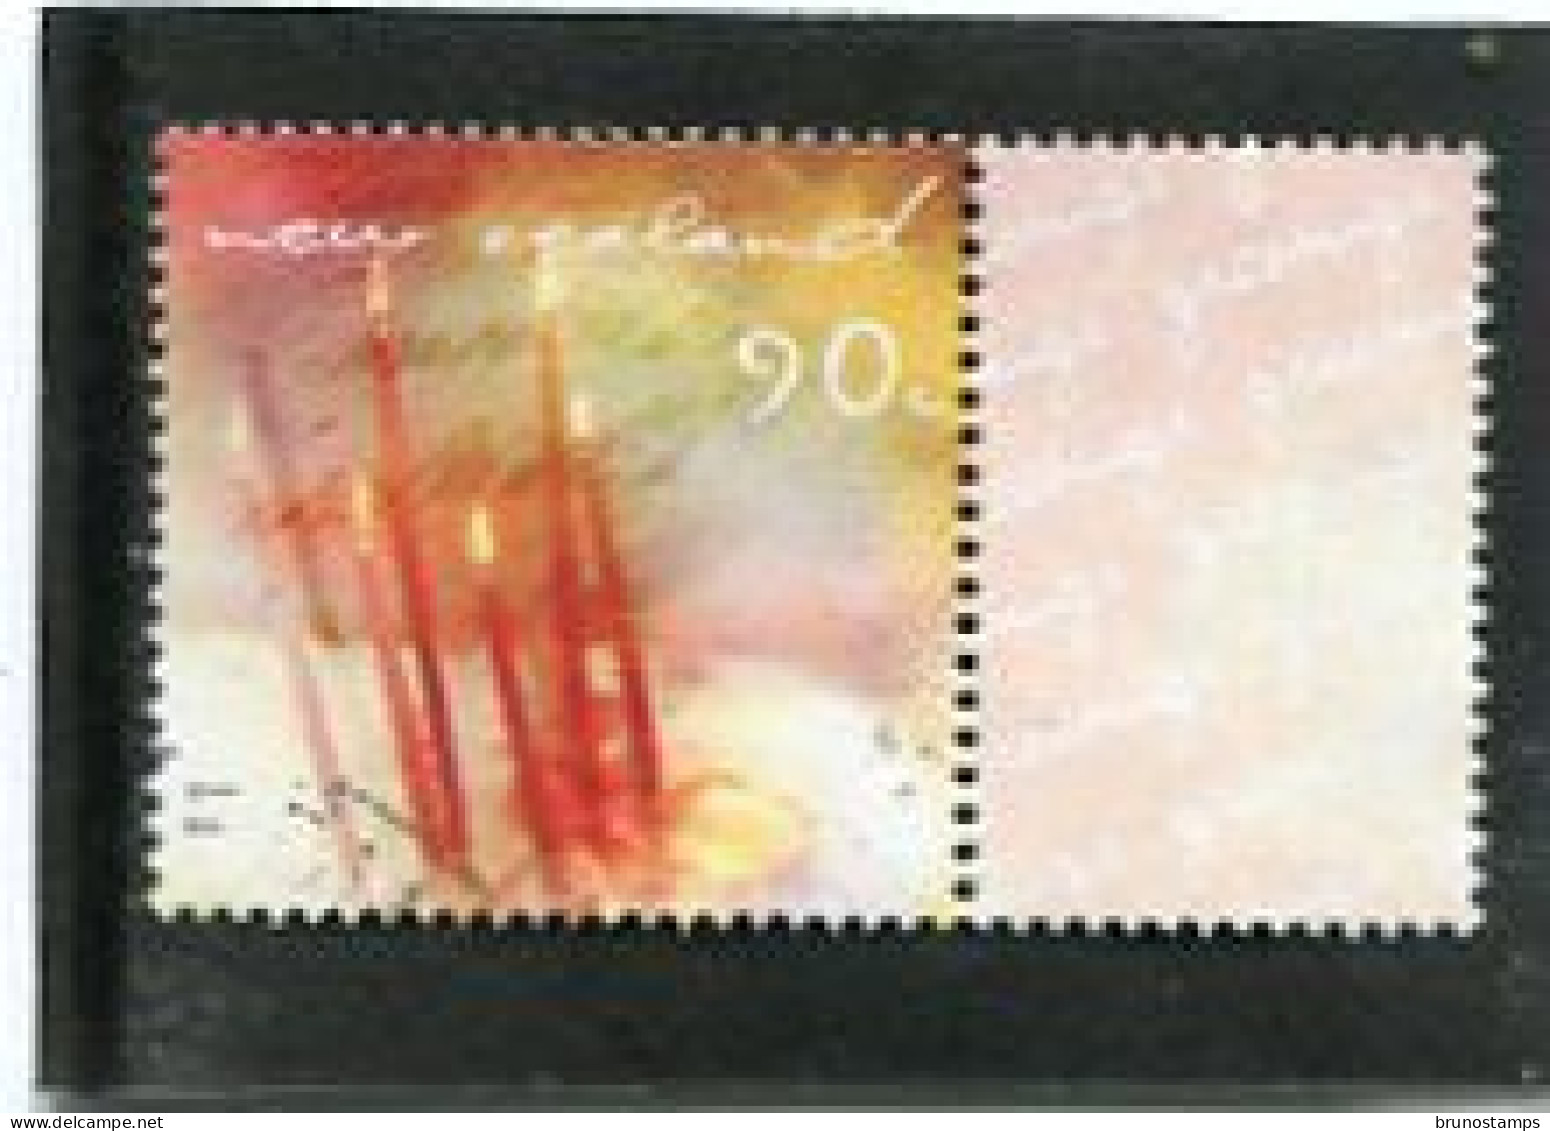 NEW ZEALAND - 2001  90c  GREETINGS  CANDLES  FINE  USED - Usati